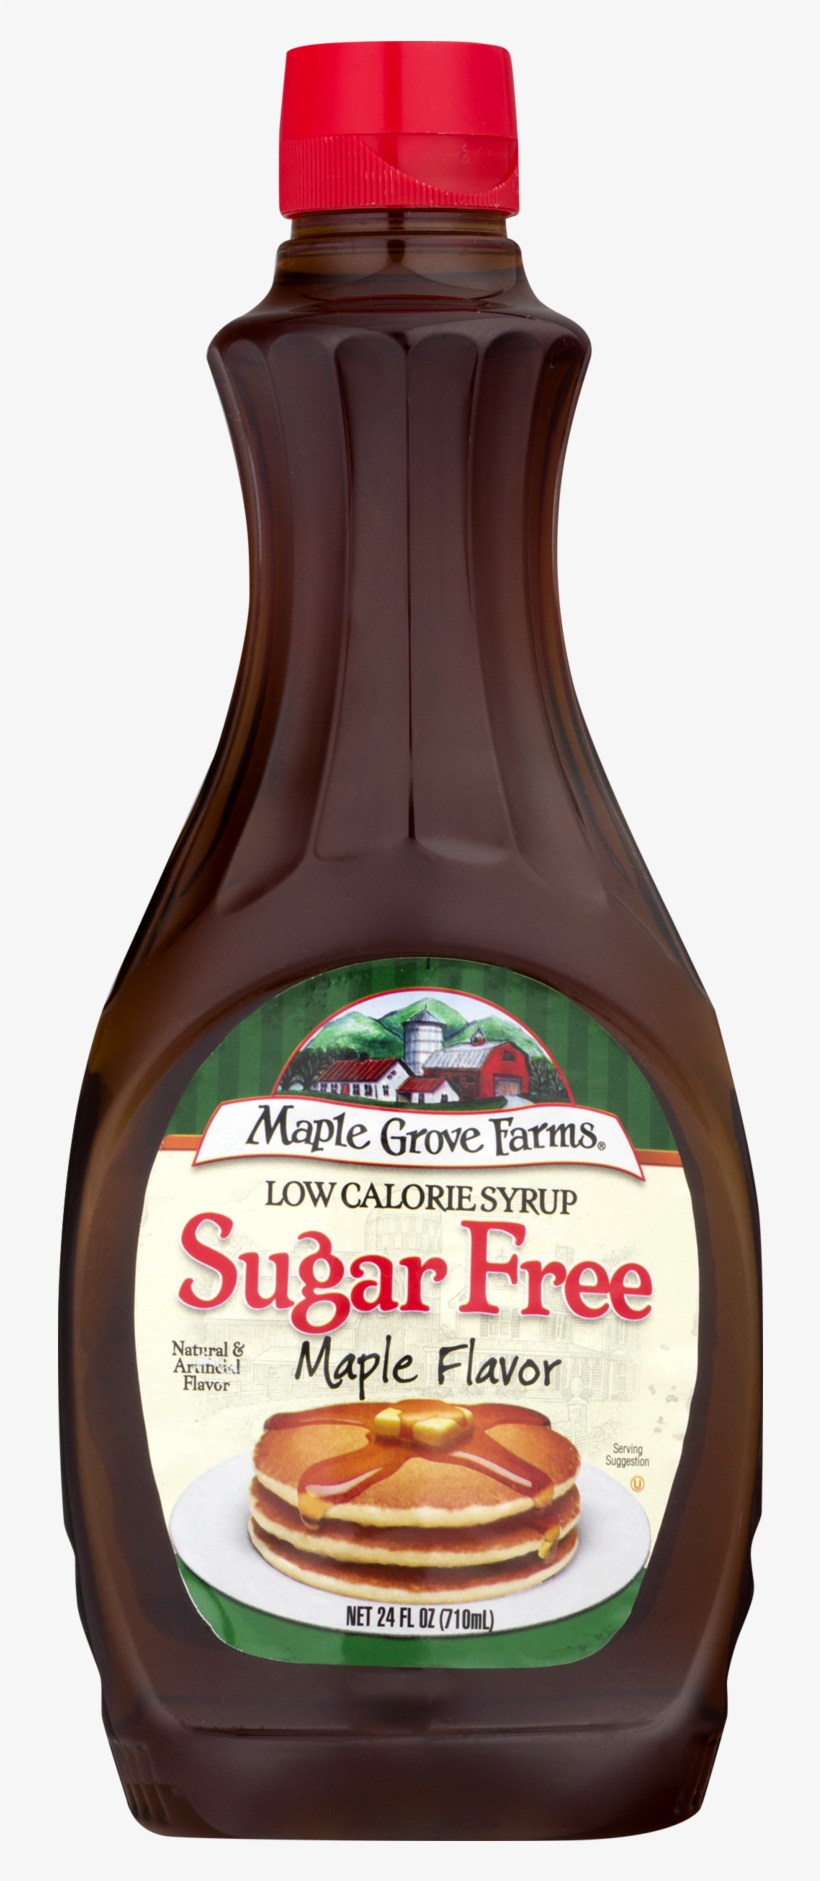 Maple Grove Farms Sugar Free Syrup, transparent png #8782835